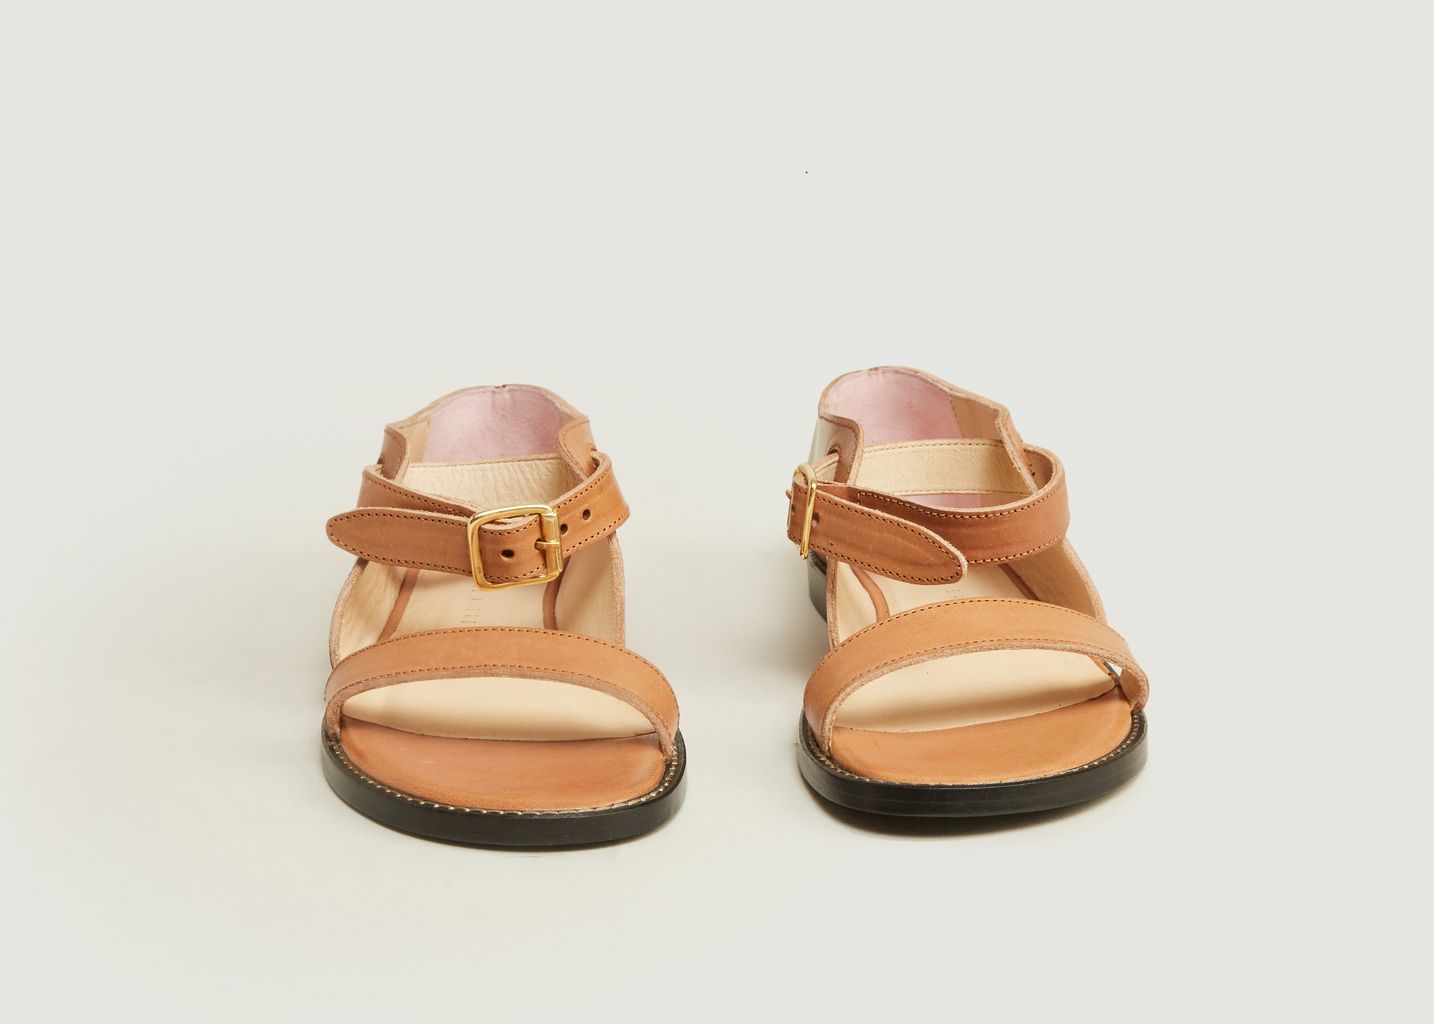 Miso Sandals - An Hour And A Shower